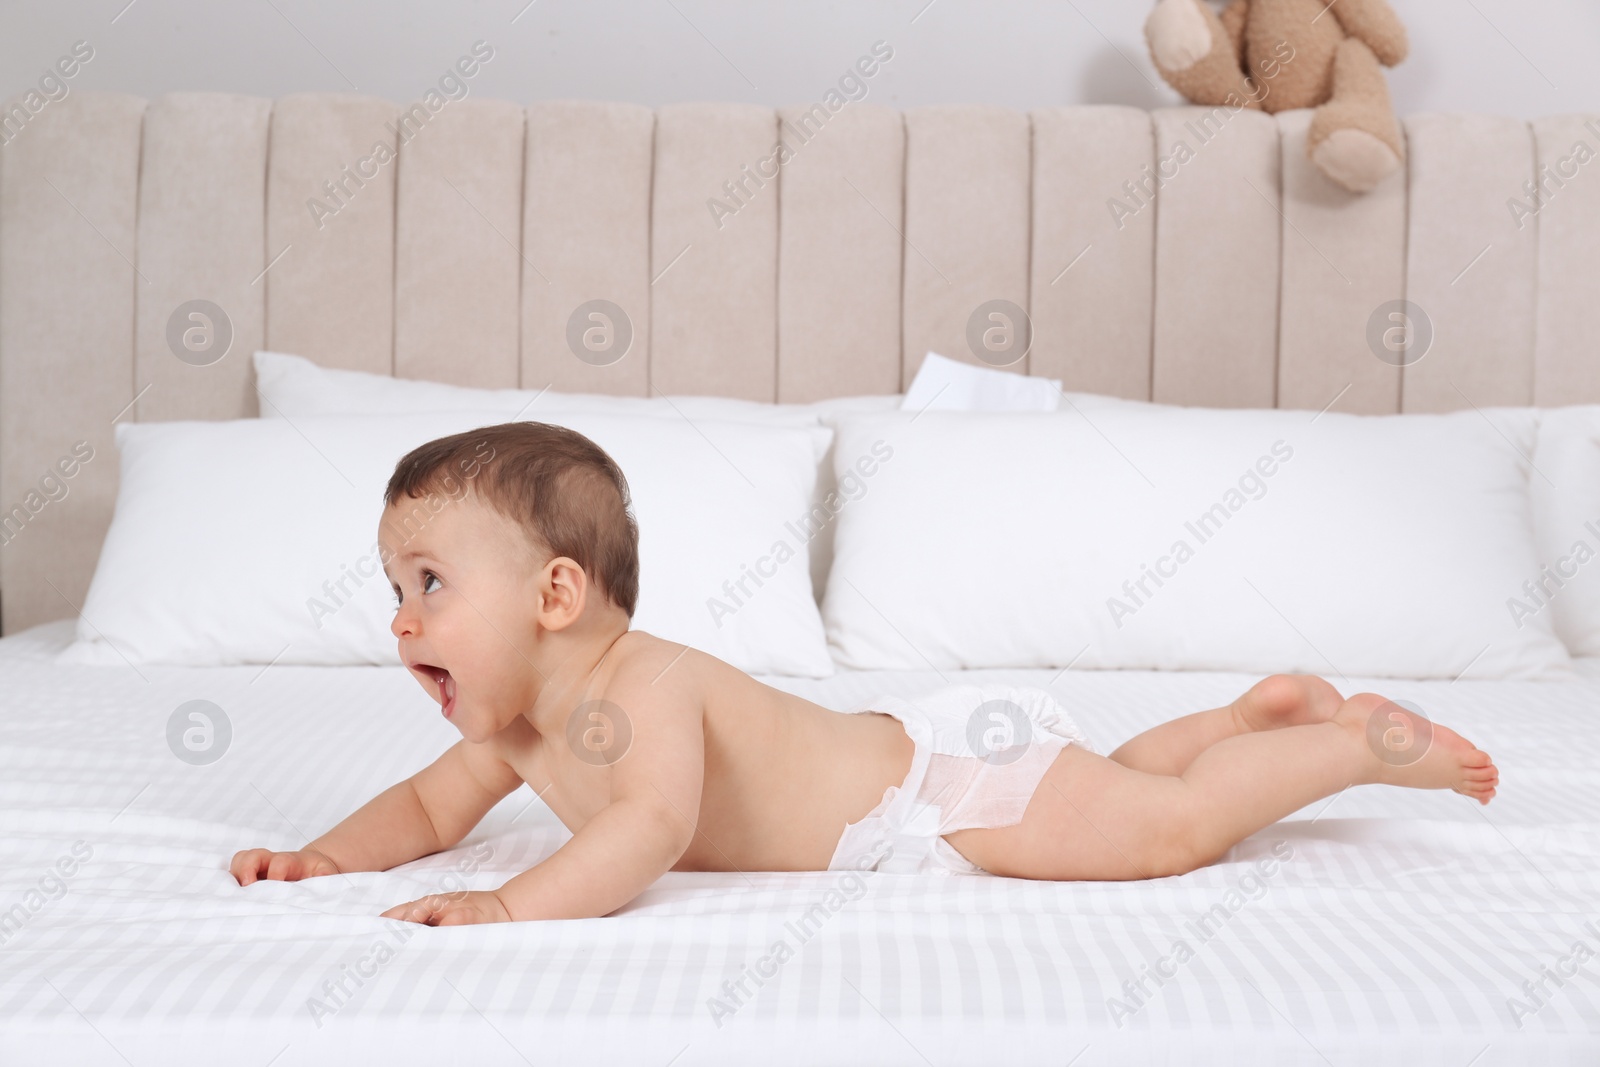 Photo of Cute baby in dry soft diaper on white bed at home